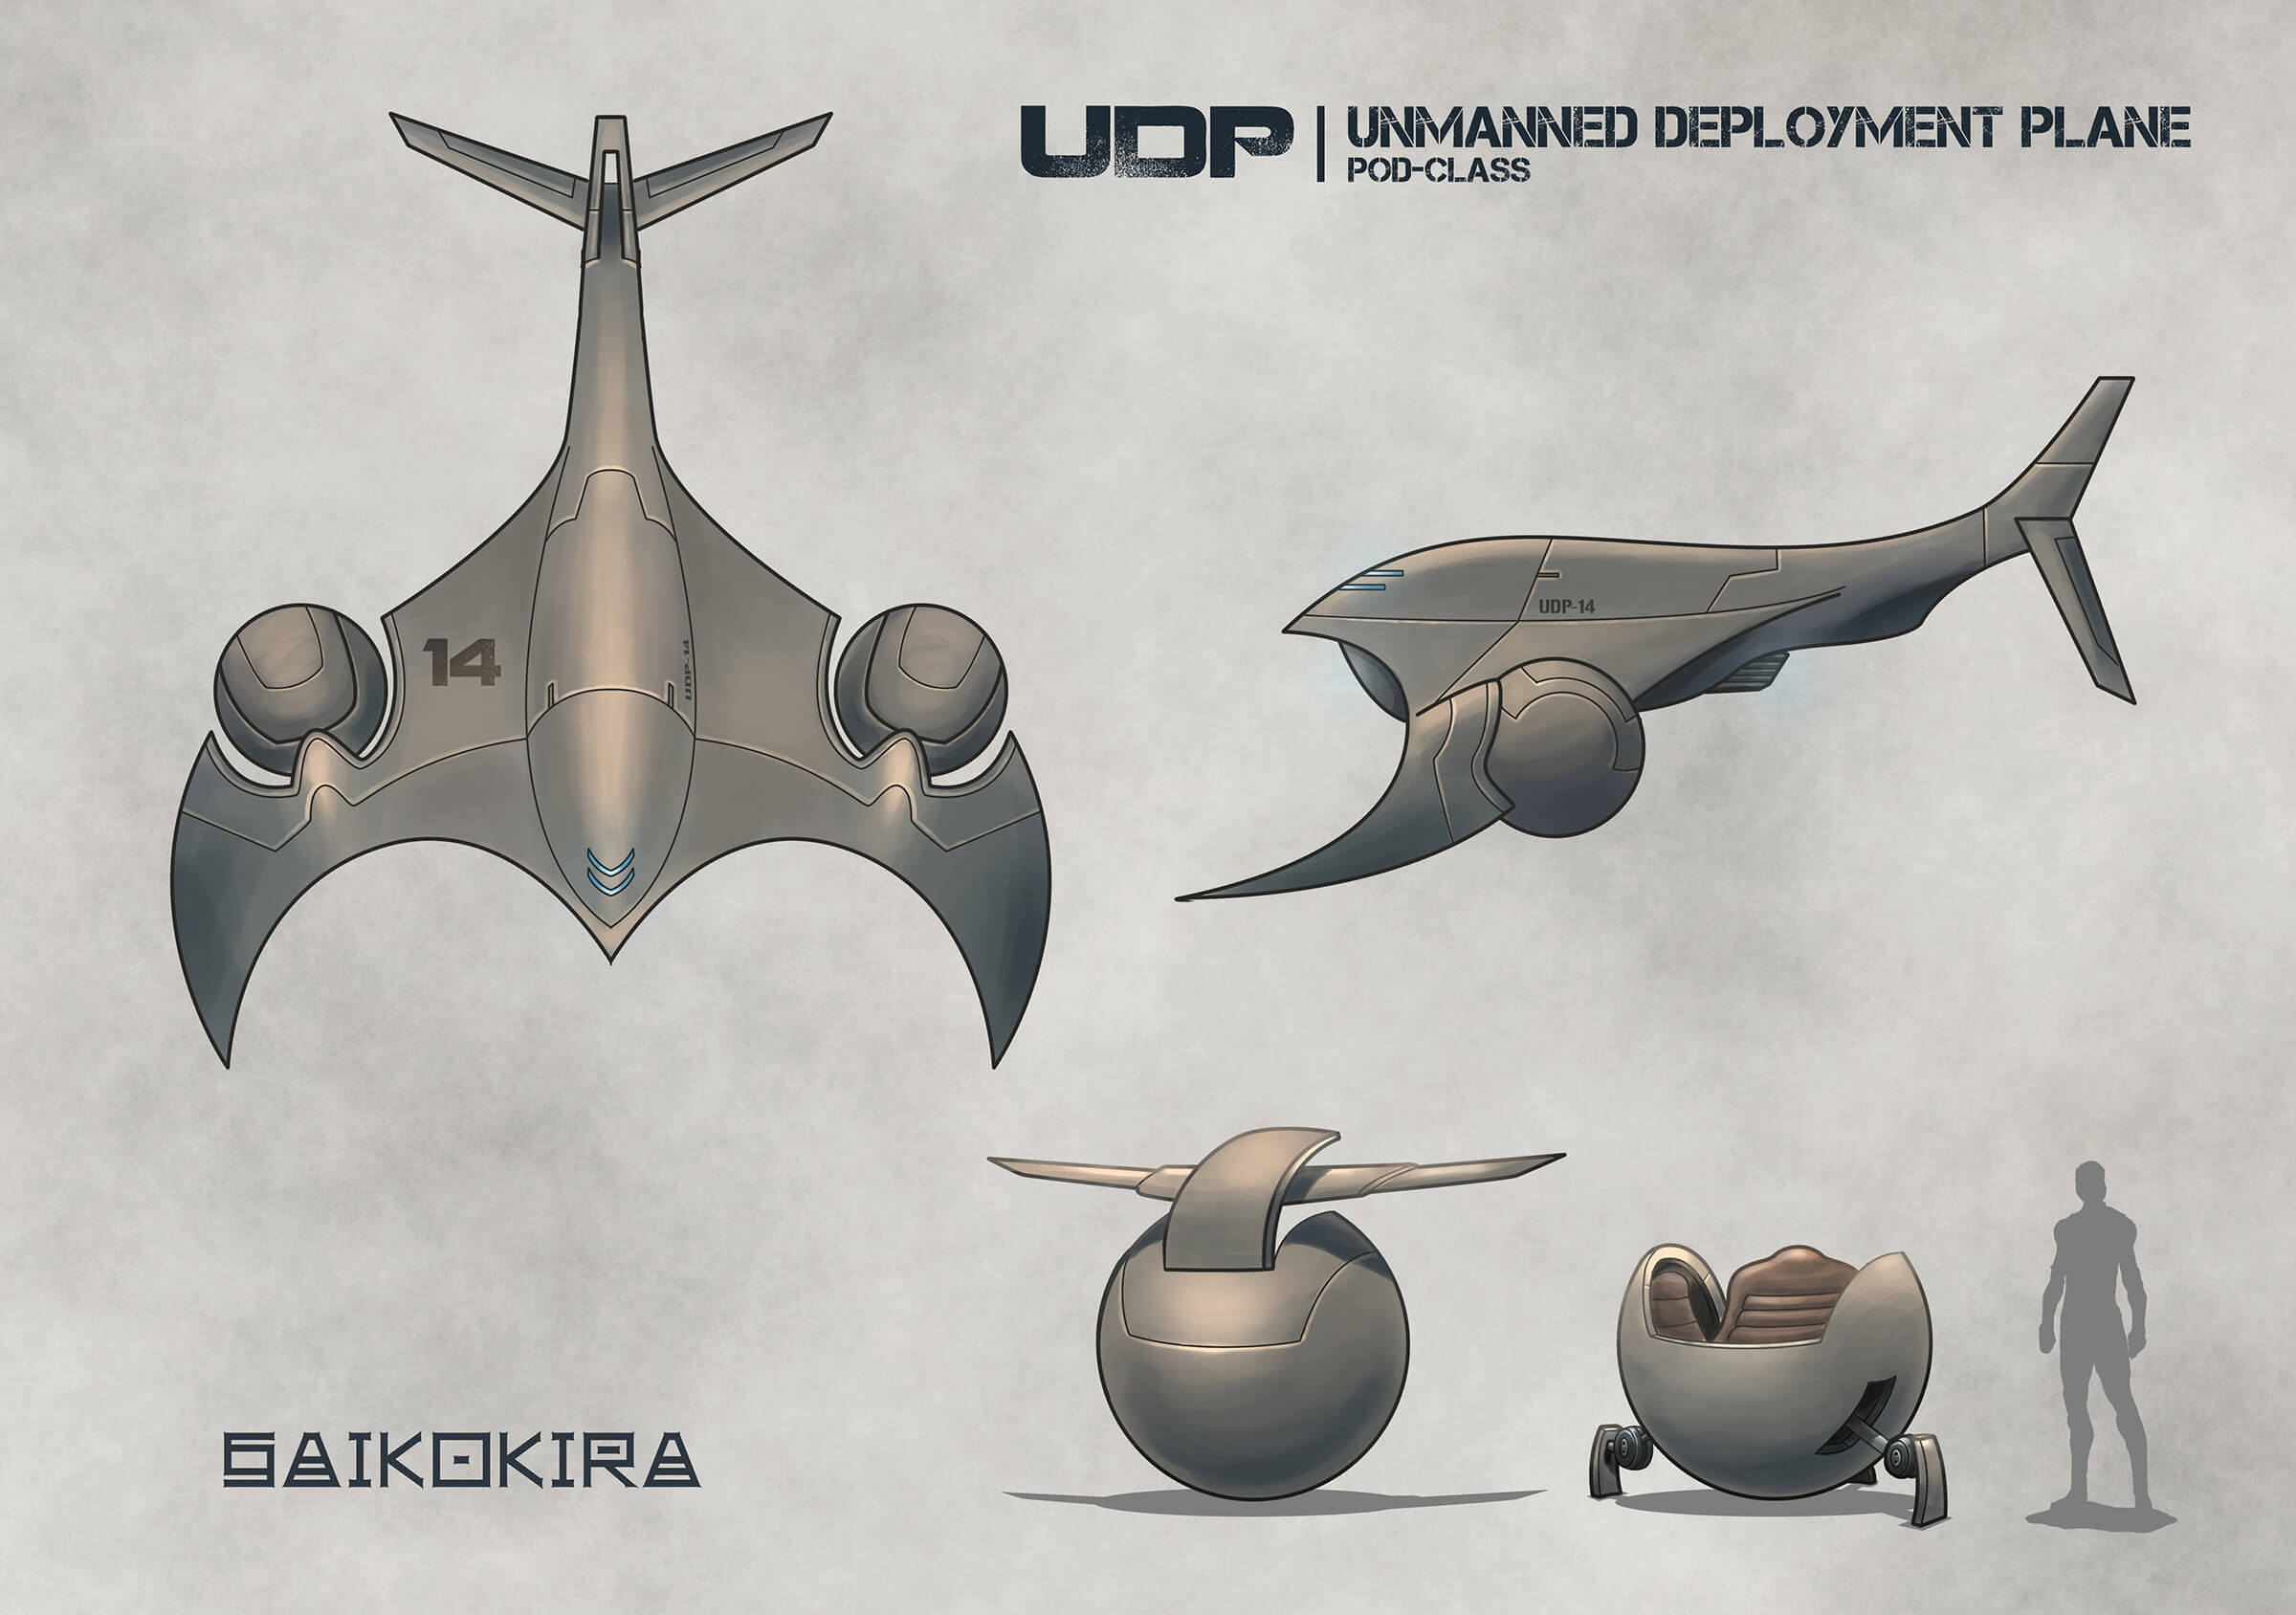 Sketch of a futuristic gray-metal flying vehicle, including spherical pods meant to detach holding a single occupant.